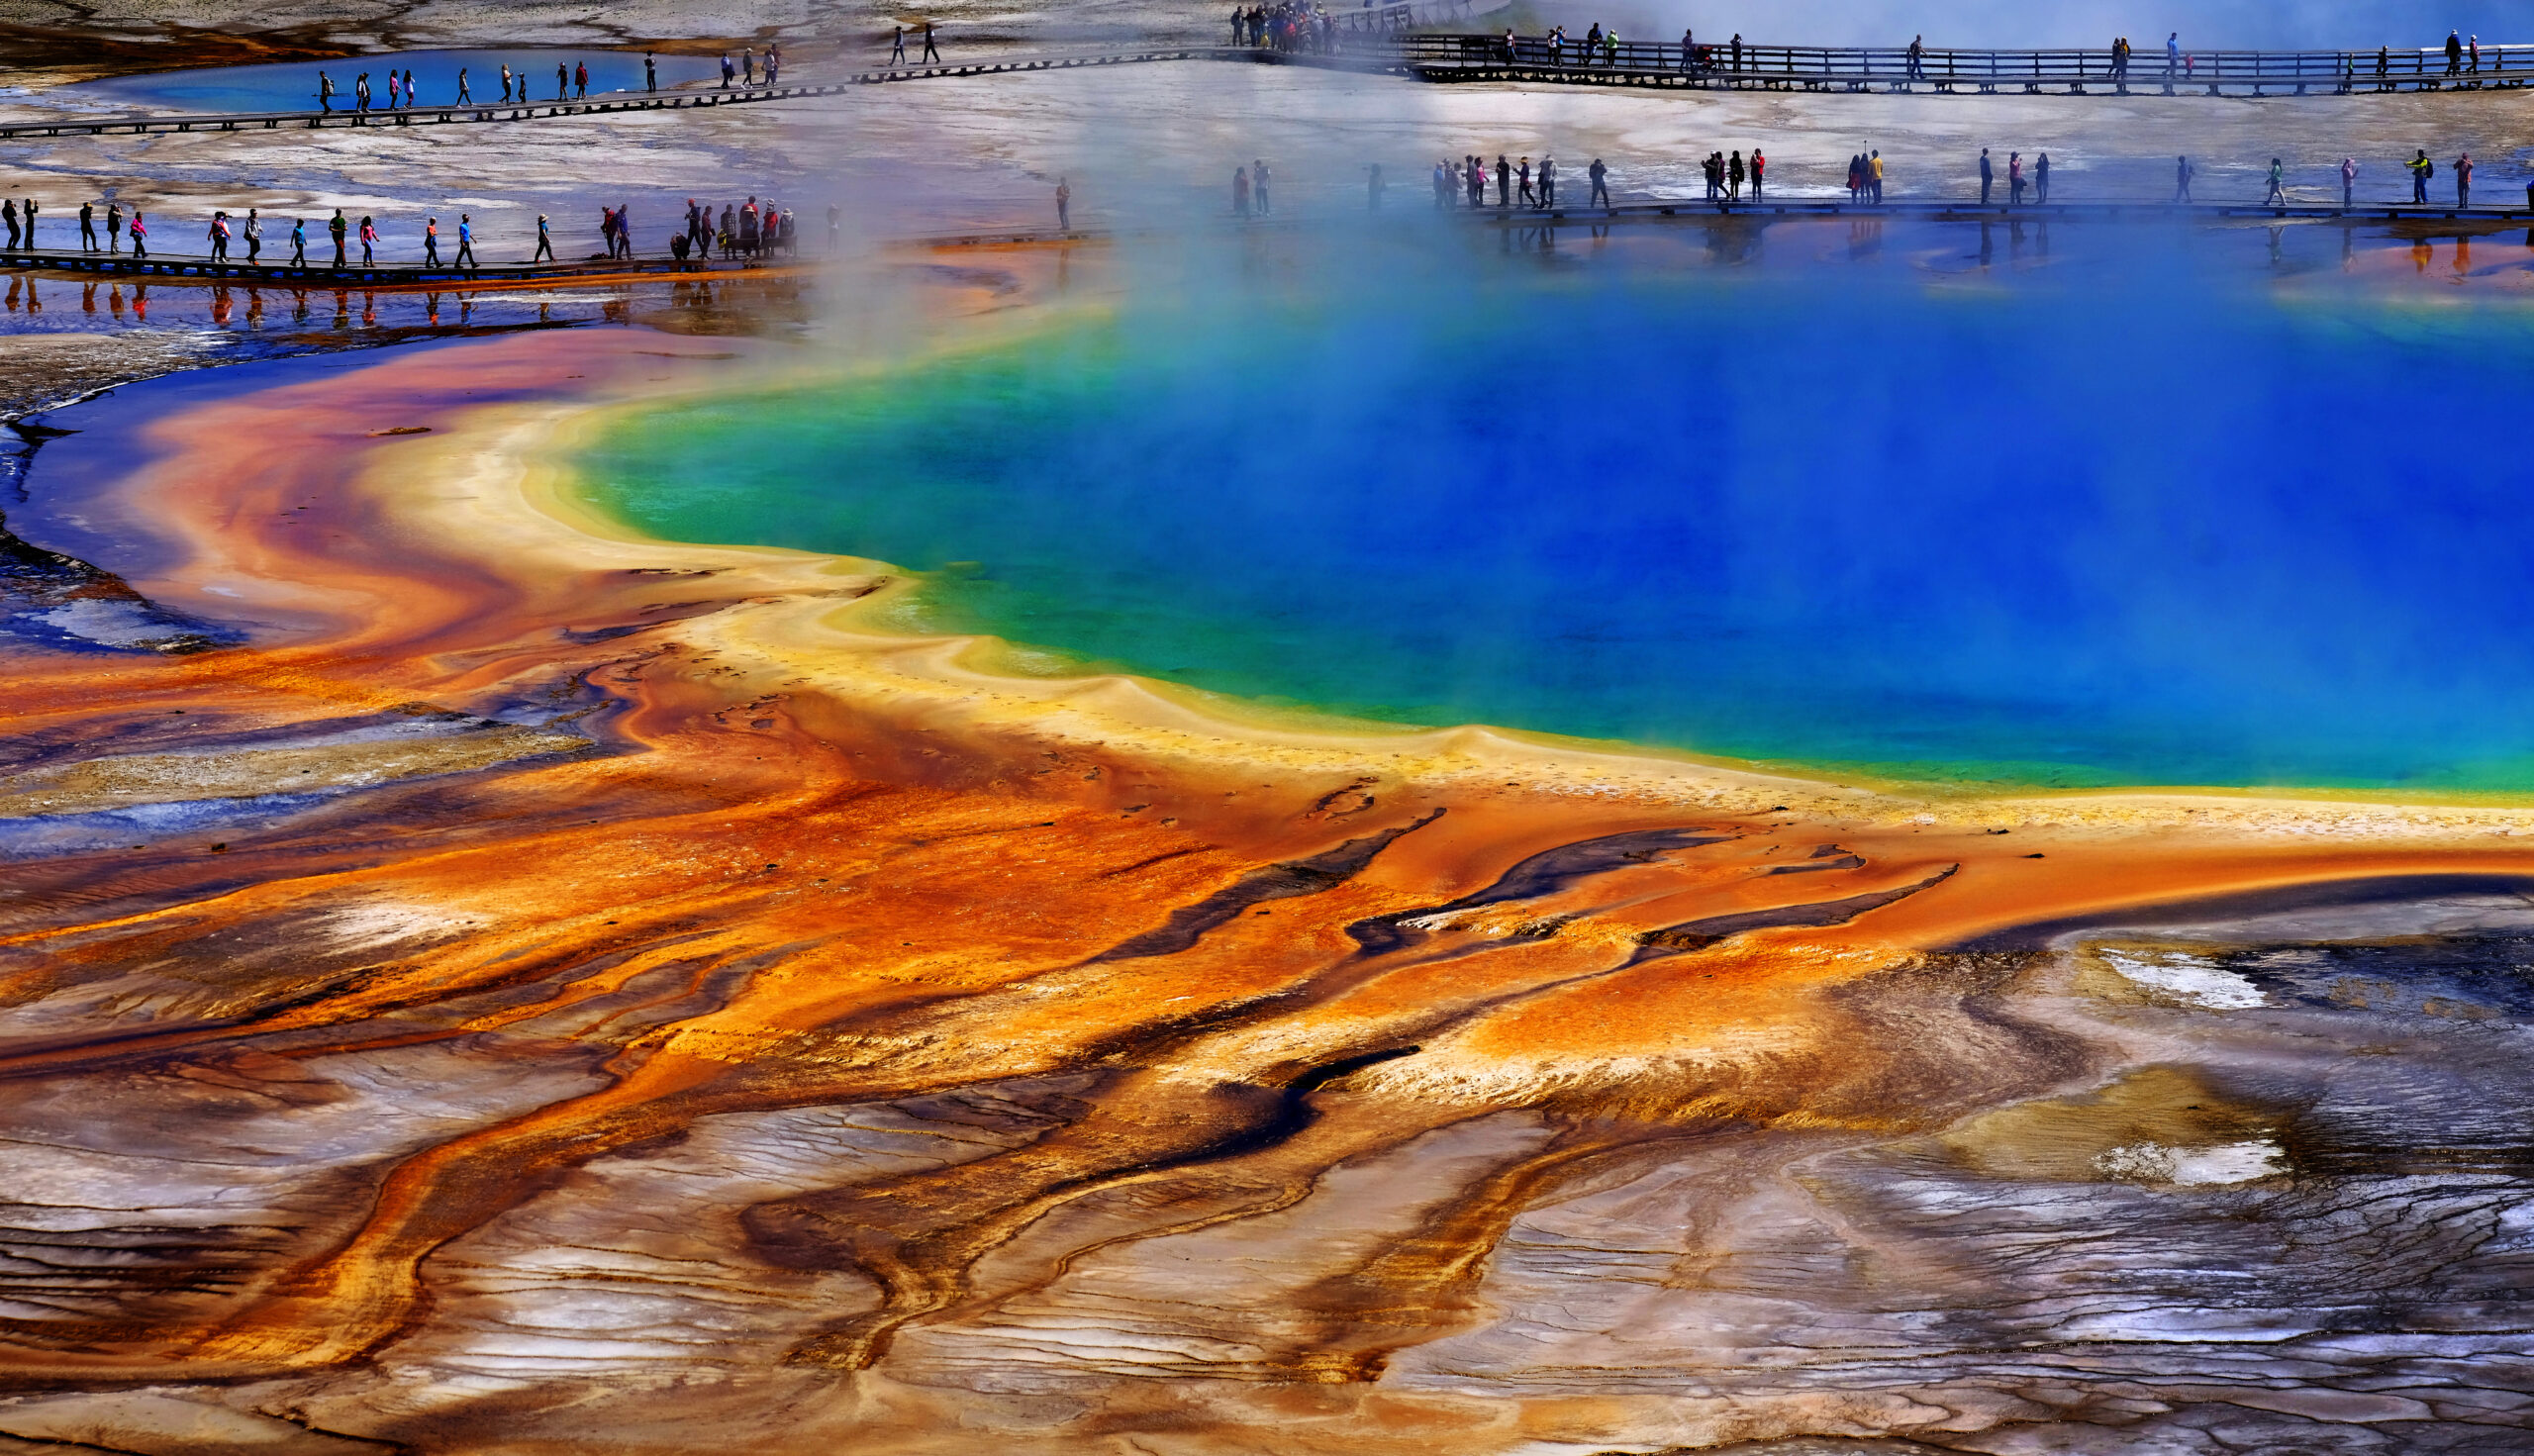 Grand Prismatice Spring in Yellowstone National Park with tourists viewing the spectacular natural scene